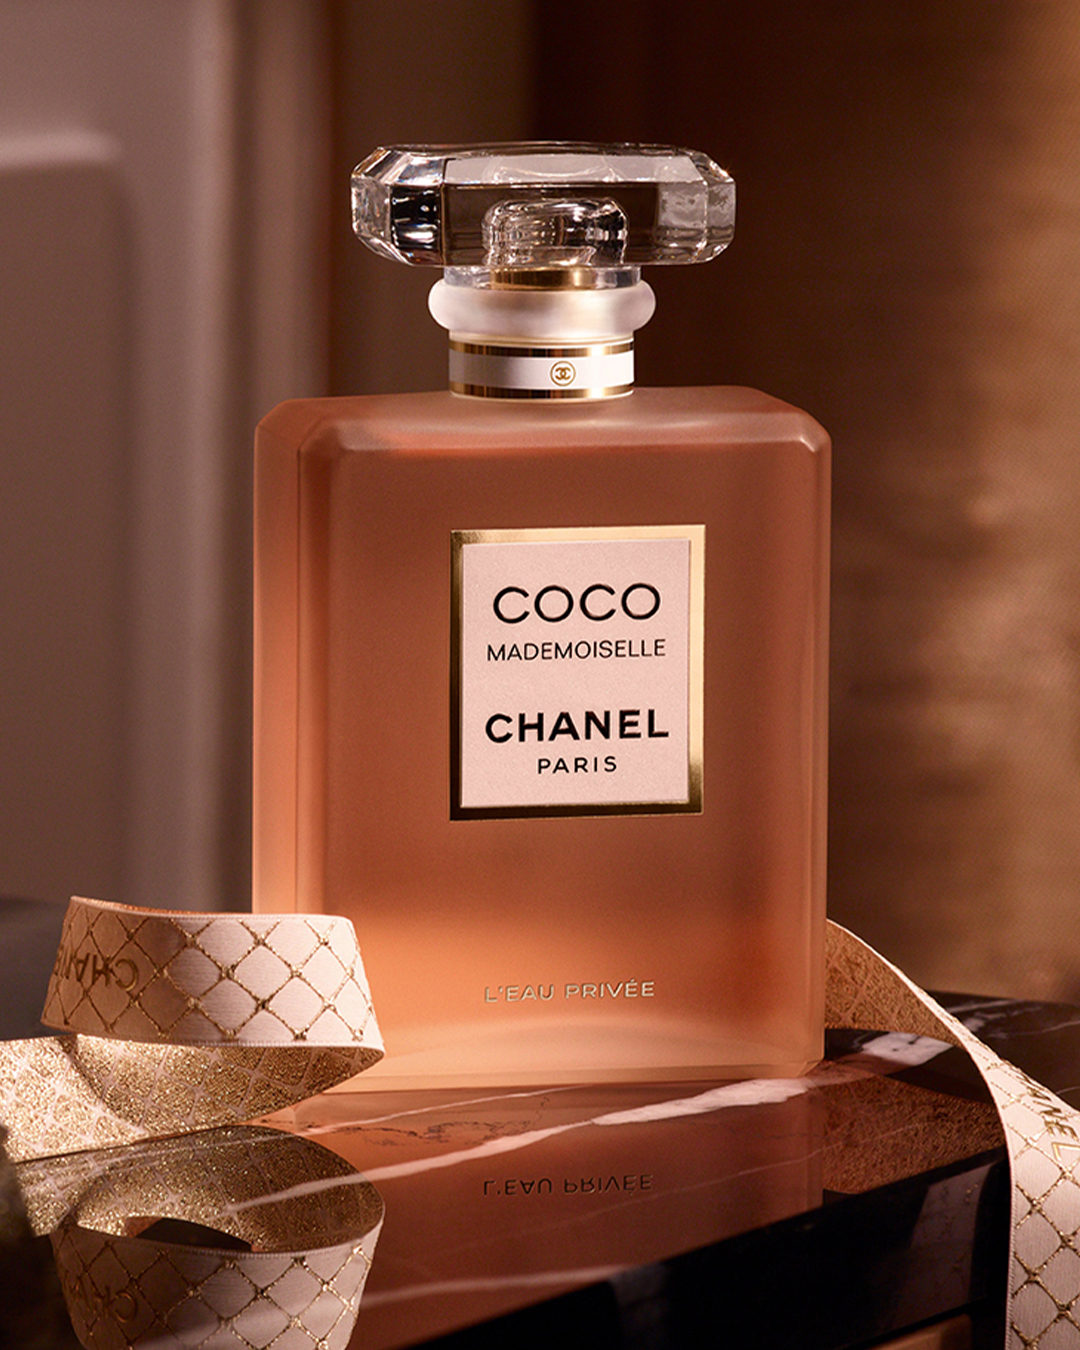 Discover CHANEL COCO MADEMOISELLE L'EAU PRIVÉE, a soft-floral fragrance  with notes of rose, jasmine, and white musk.